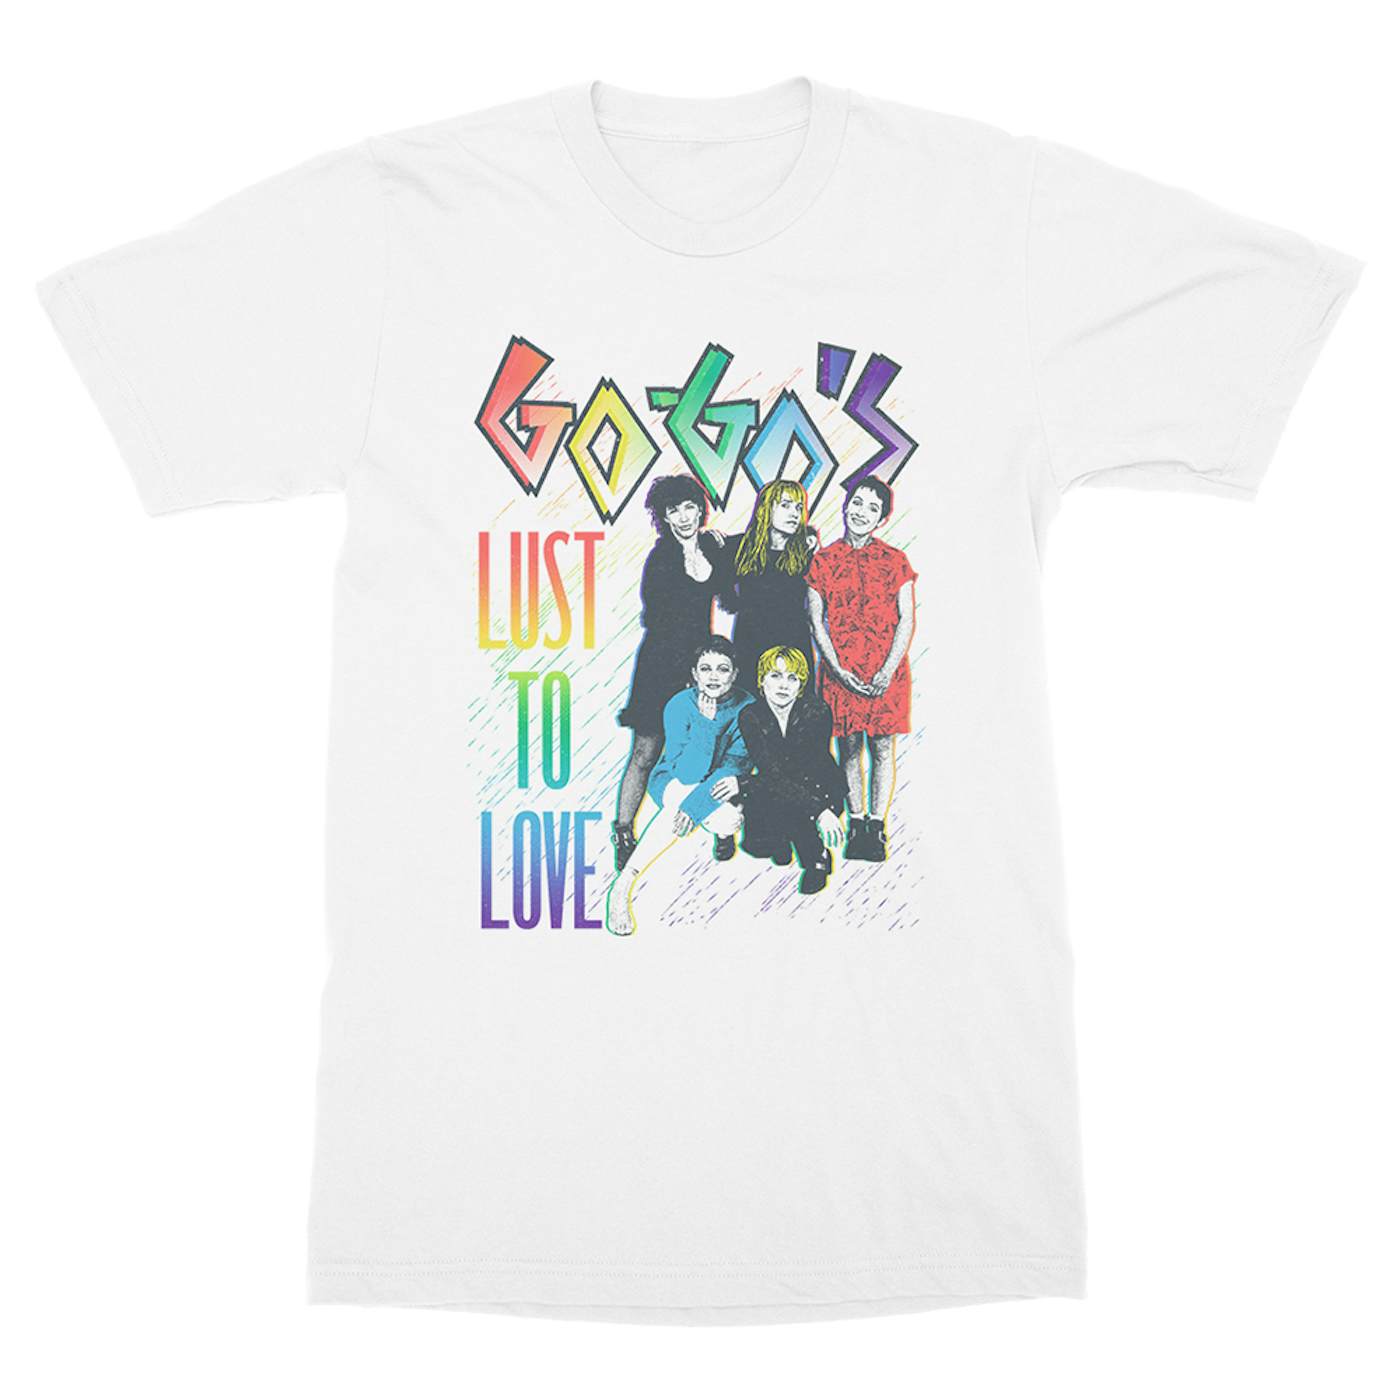 The Go-Go's Lust to Love T-Shirt